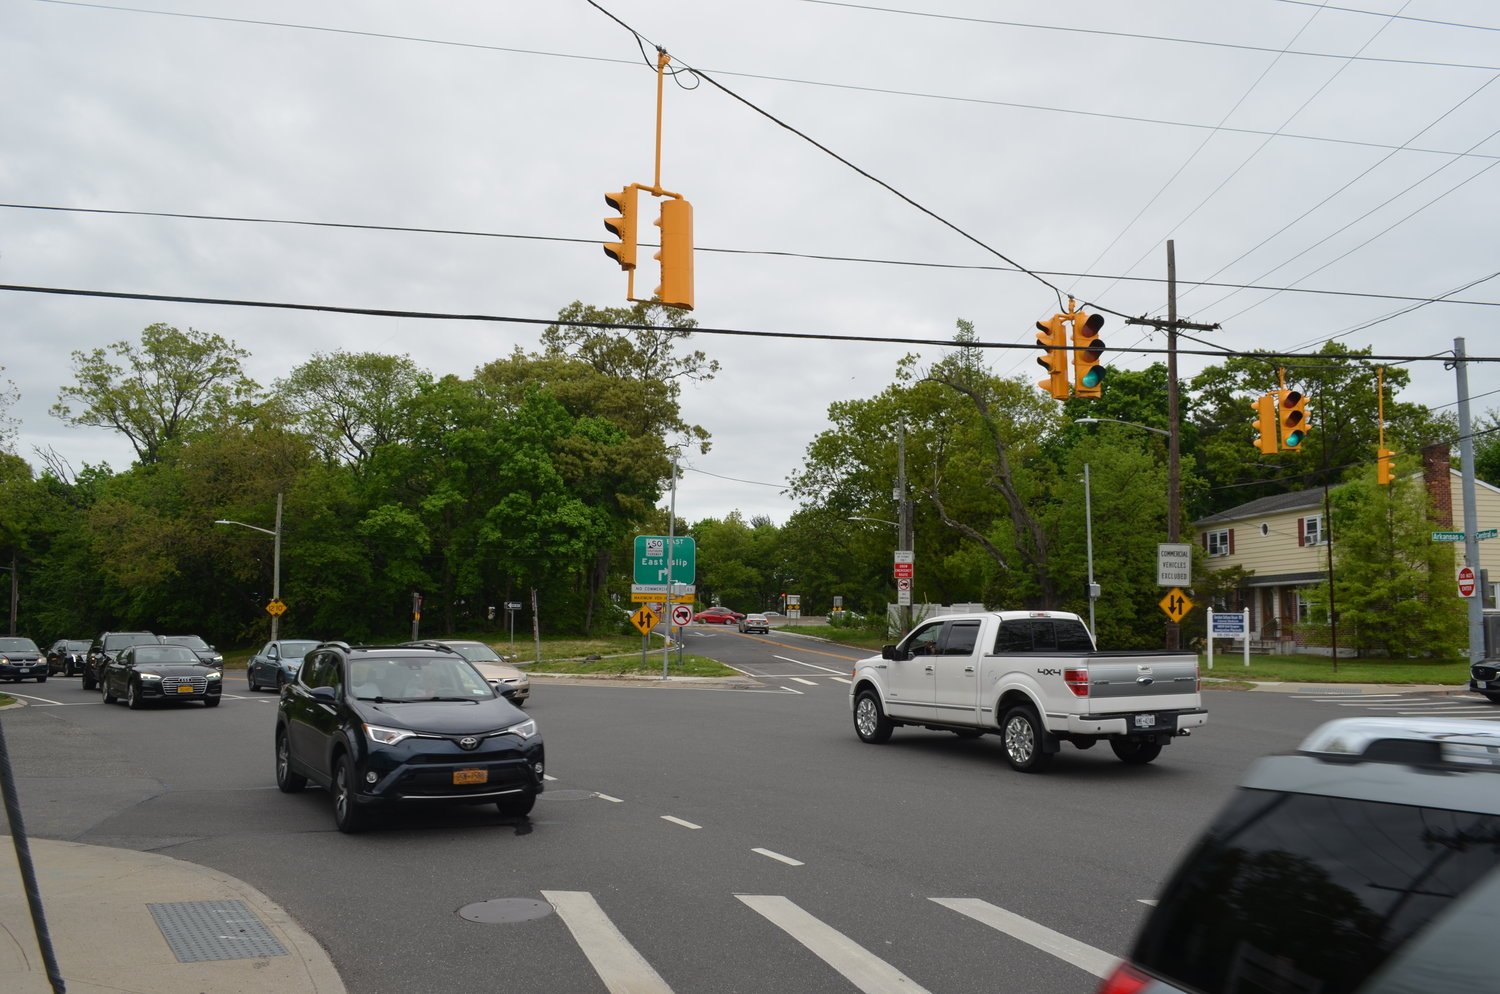 Traffic at the intersection of Stuart and Central avenues, looking toward the entrance and exit ramps of the Southern State Parkway’s Exit 13.